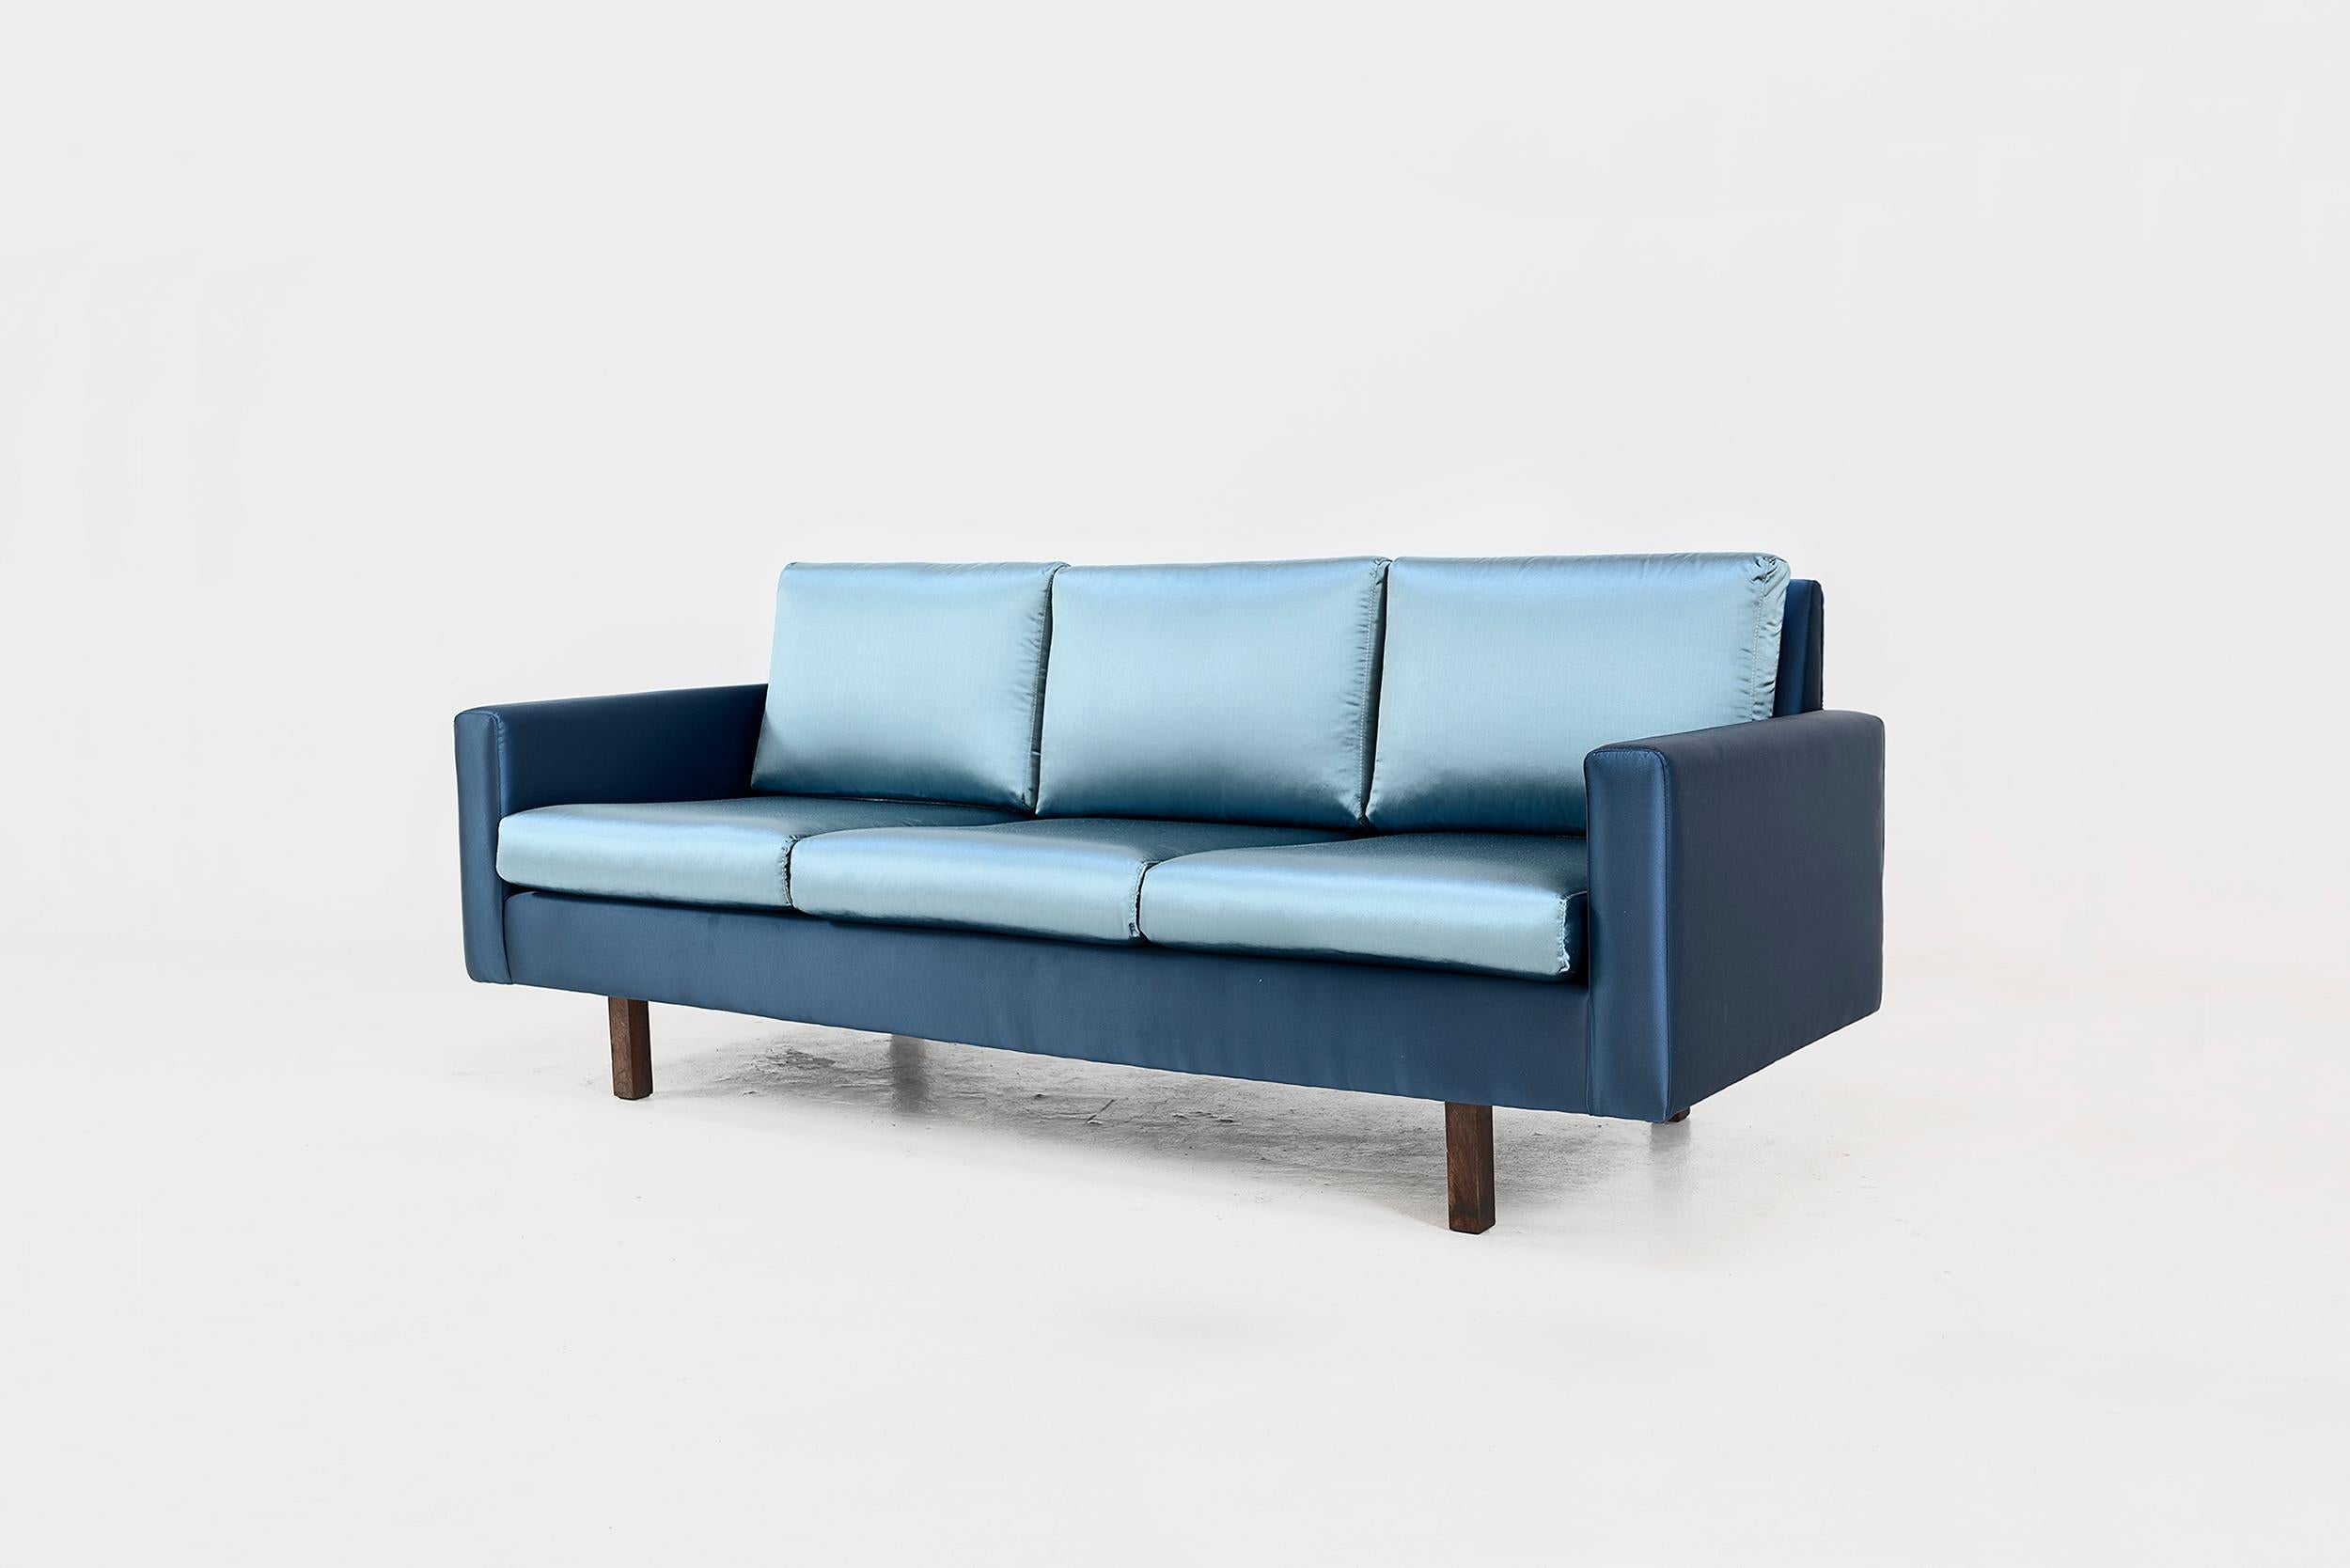 Joaquim Tenreiro
Three seats sofa
Manufactured by Tenreiro Moveis e Decoraçaos
Brazil, 1954
Jacaranda, upholstery
From the archives of Side Gallery, Barcelona

Measurements:
200 cm x 77 cm x 74 H cm (42 in seat height)
78.75 in x 30.32 in x